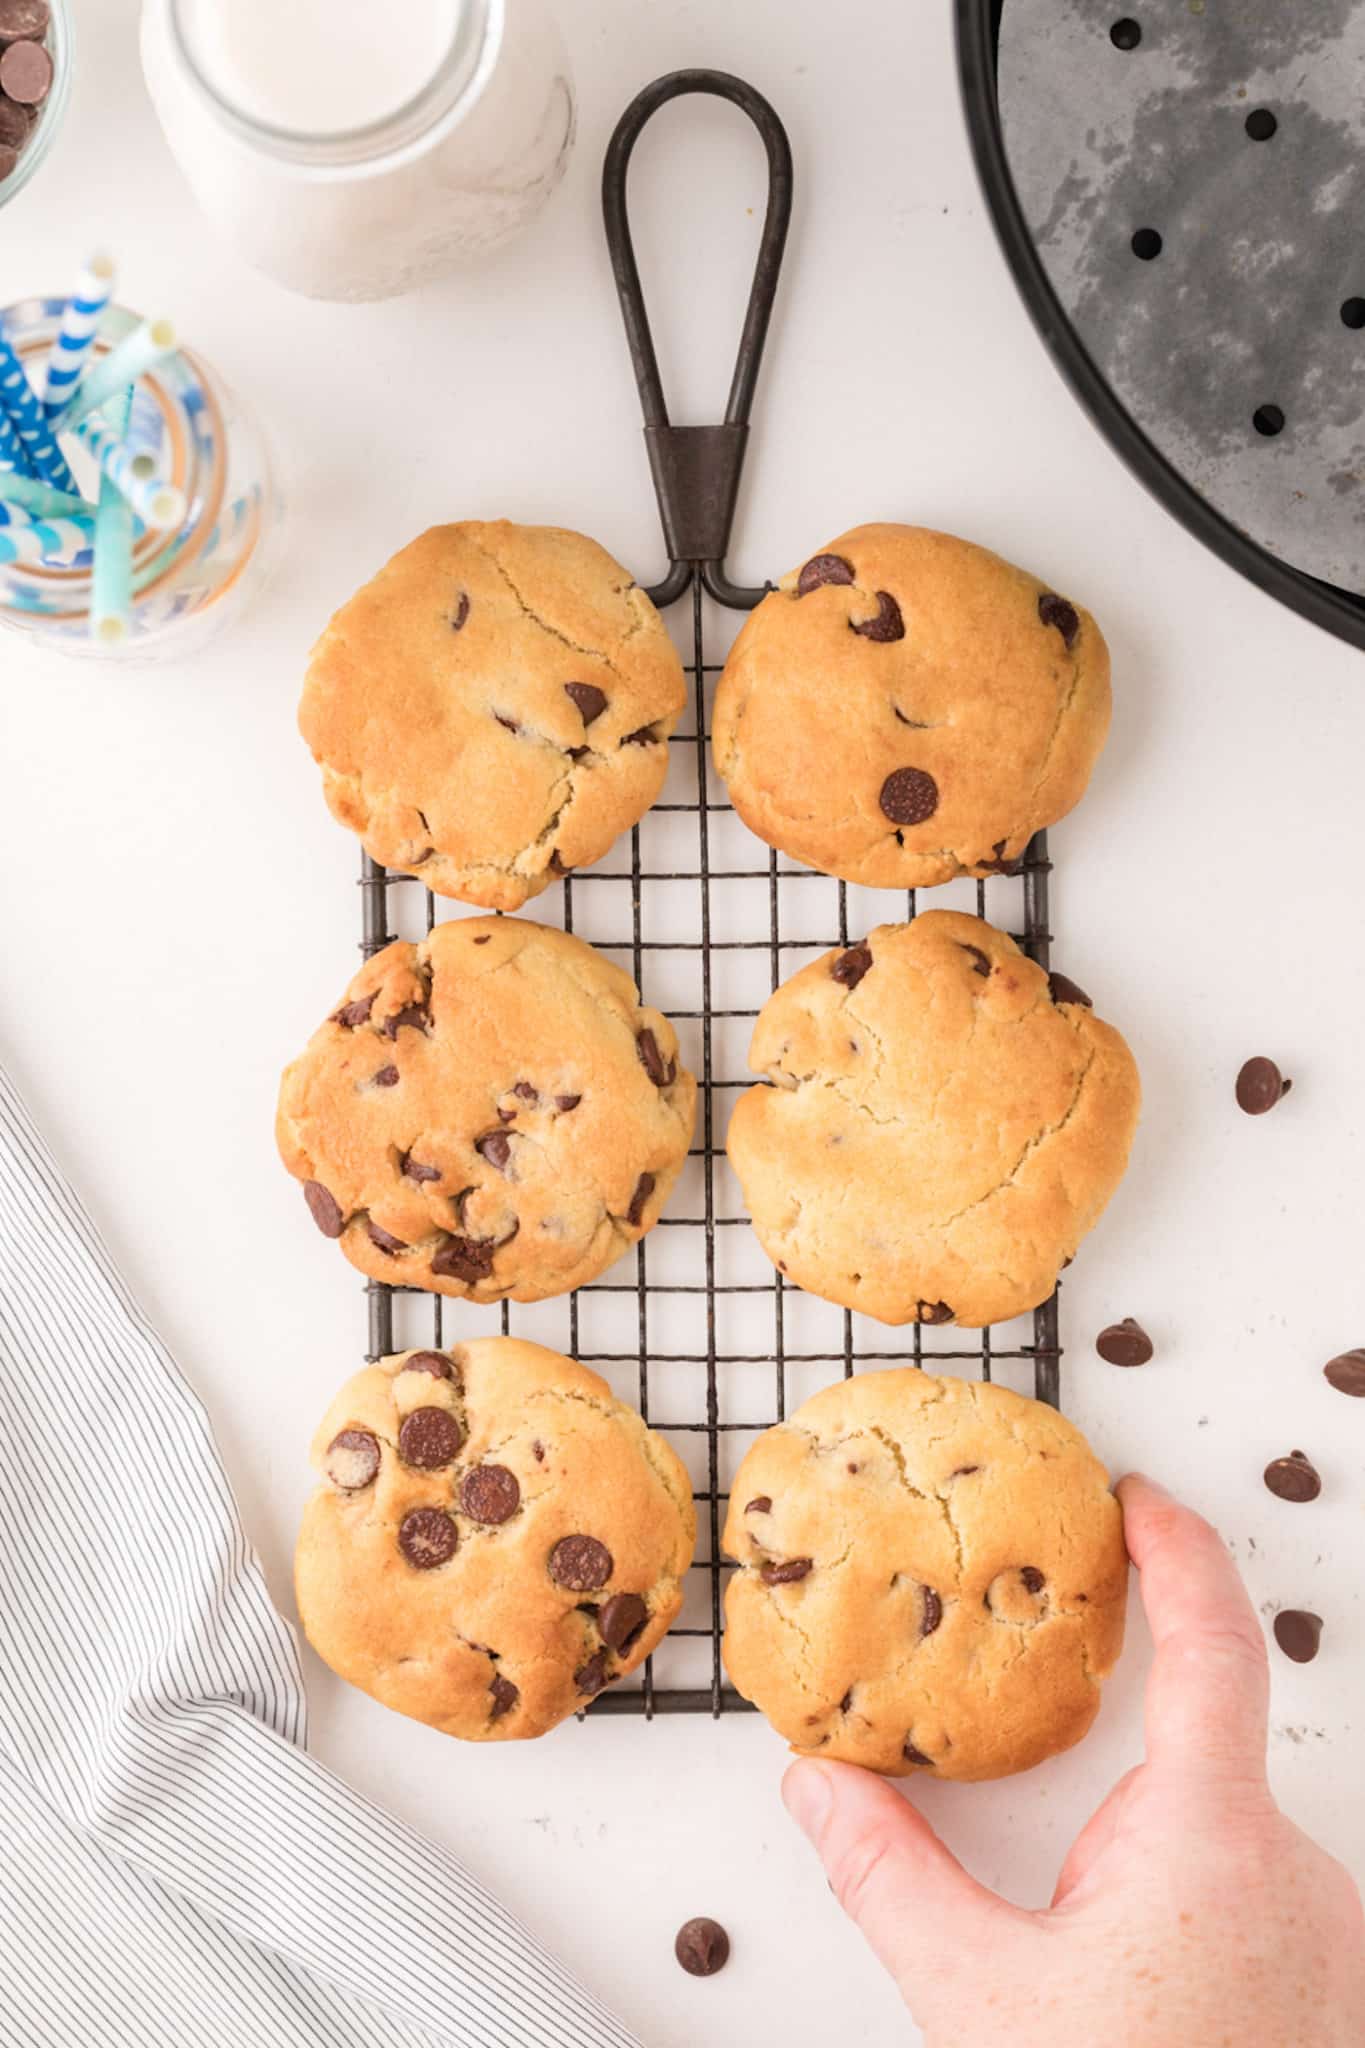 https://www.cleaneatingkitchen.com/wp-content/uploads/2021/09/air-fryer-cookies-on-drying-rack-scaled.jpg